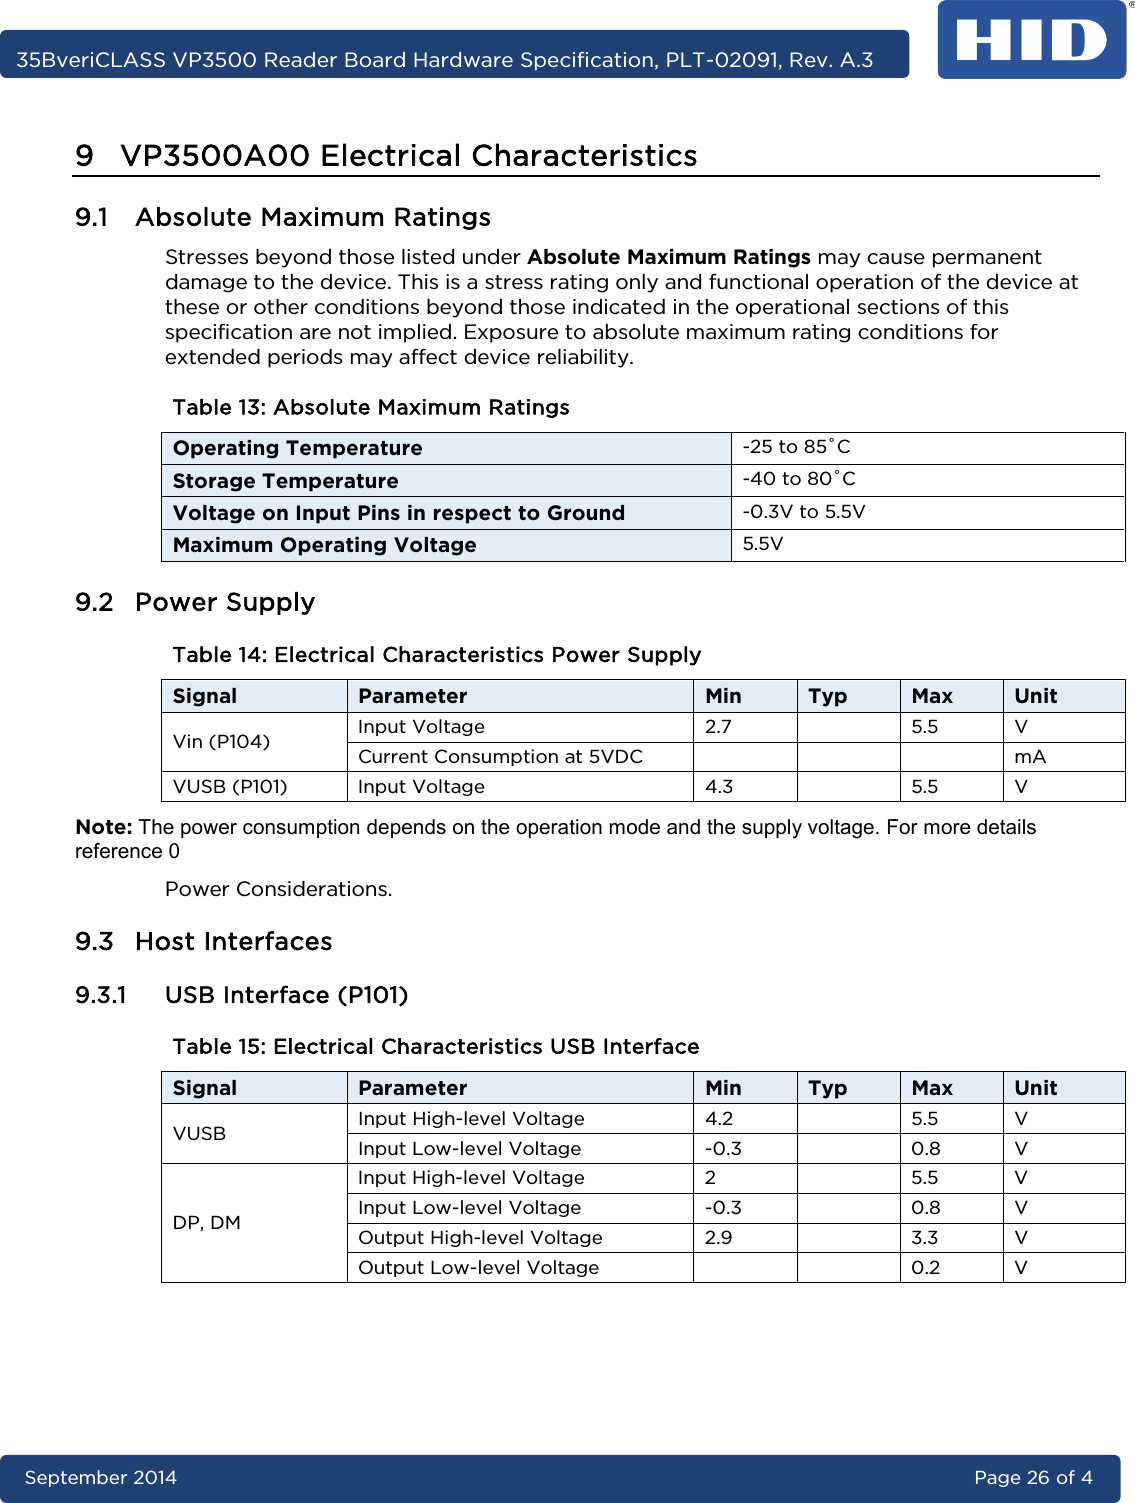     35BveriCLASS VP3500 Reader Board Hardware Specification, PLT-02091, Rev. A.3 September 2014 Page 26 of 4  9 VP3500A00 Electrical Characteristics 9.1 Absolute Maximum Ratings Stresses beyond those listed under Absolute Maximum Ratings may cause permanent damage to the device. This is a stress rating only and functional operation of the device at these or other conditions beyond those indicated in the operational sections of this specification are not implied. Exposure to absolute maximum rating conditions for extended periods may affect device reliability. Table 13: Absolute Maximum Ratings Operating Temperature -25 to 85˚C Storage Temperature -40 to 80˚C Voltage on Input Pins in respect to Ground -0.3V to 5.5V Maximum Operating Voltage 5.5V 9.2 Power Supply Table 14: Electrical Characteristics Power Supply Signal Parameter Min Typ Max Unit Vin (P104) Input Voltage 2.7    5.5  V Current Consumption at 5VDC        mA VUSB (P101) Input Voltage 4.3    5.5  V Note: The power consumption depends on the operation mode and the supply voltage. For more details reference 0  Power Considerations. 9.3 Host Interfaces 9.3.1 USB Interface (P101) Table 15: Electrical Characteristics USB Interface Signal Parameter Min Typ Max Unit VUSB Input High-level Voltage 4.2    5.5  V Input Low-level Voltage  -0.3    0.8  V DP, DM Input High-level Voltage  2    5.5  V Input Low-level Voltage  -0.3    0.8  V Output High-level Voltage 2.9    3.3  V Output Low-level Voltage      0.2  V    